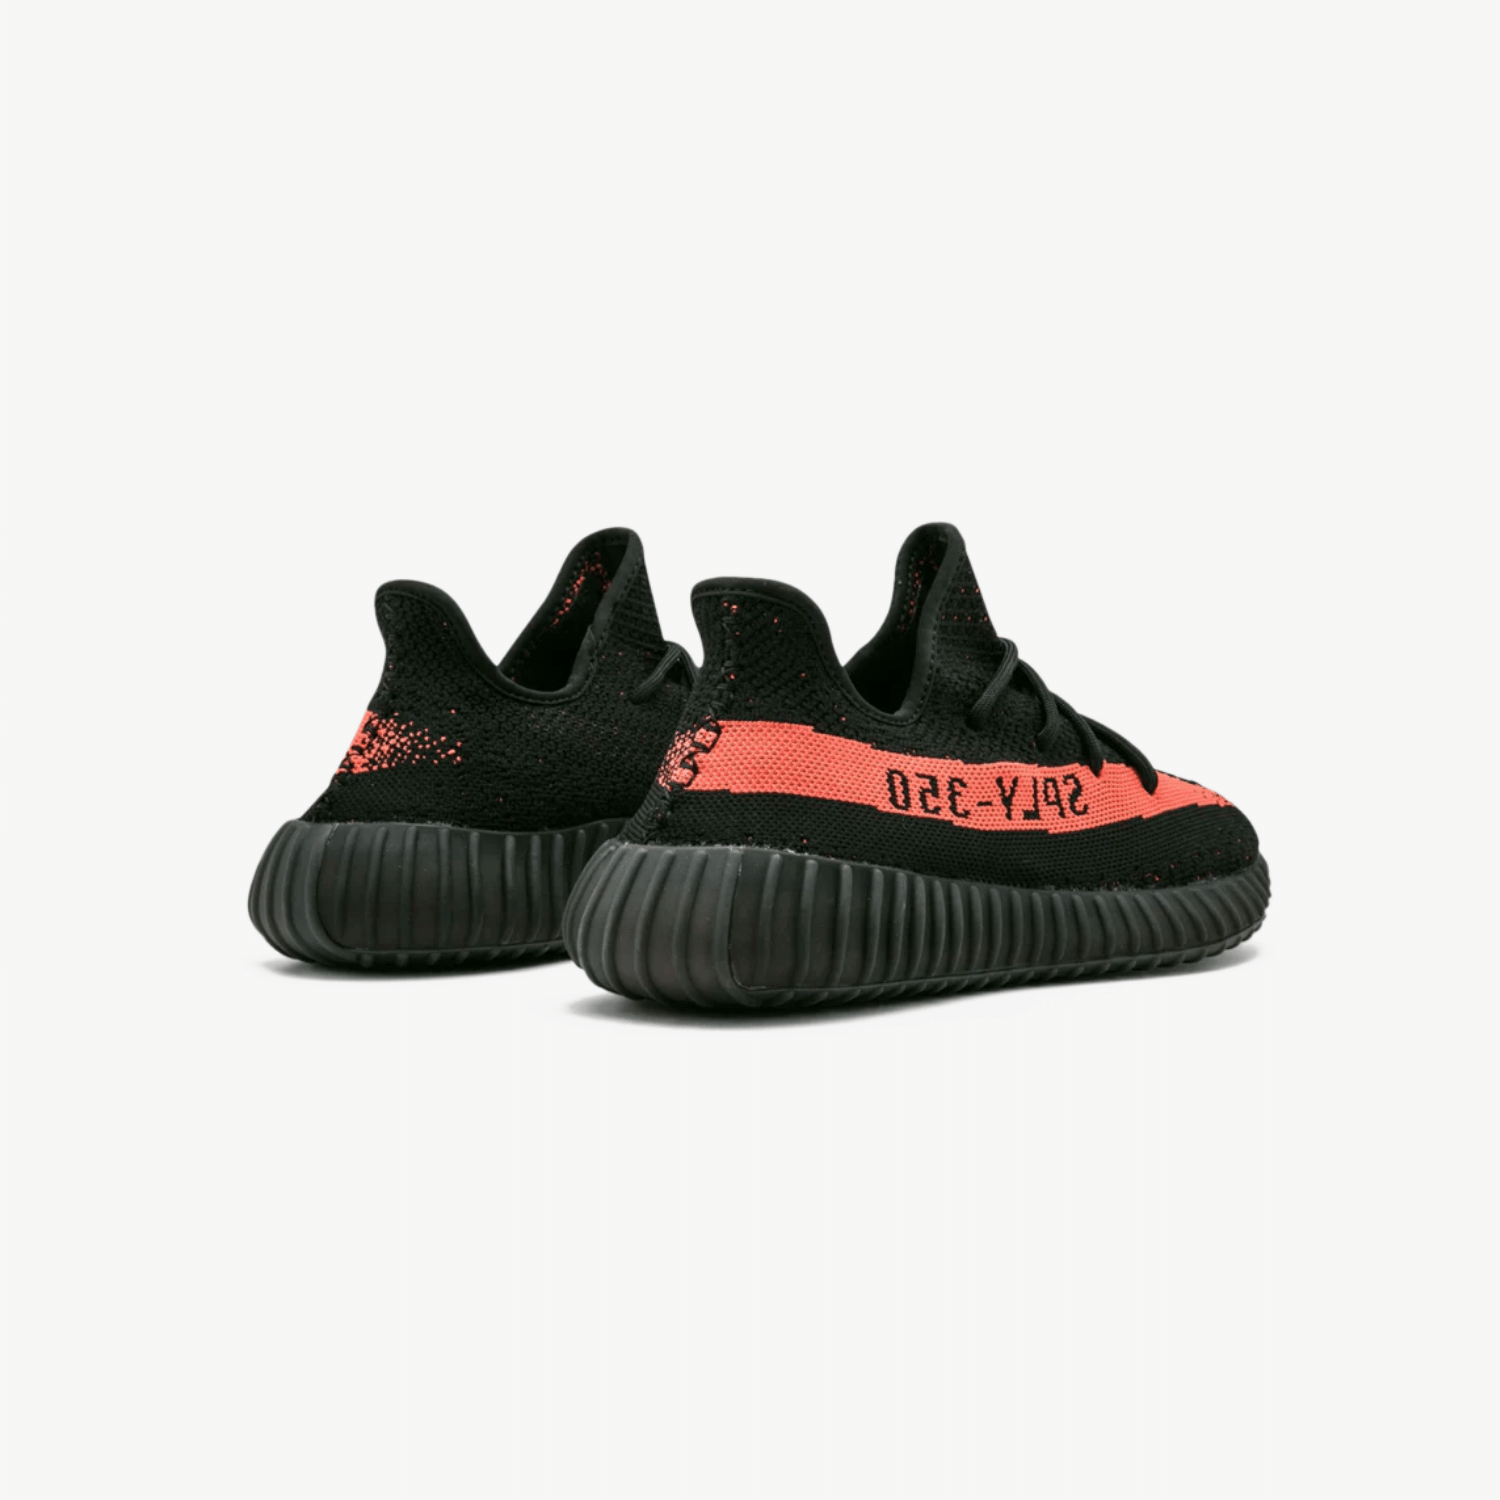 yeezy-boost-350-v2-black-red-BY9612-unfazed-3